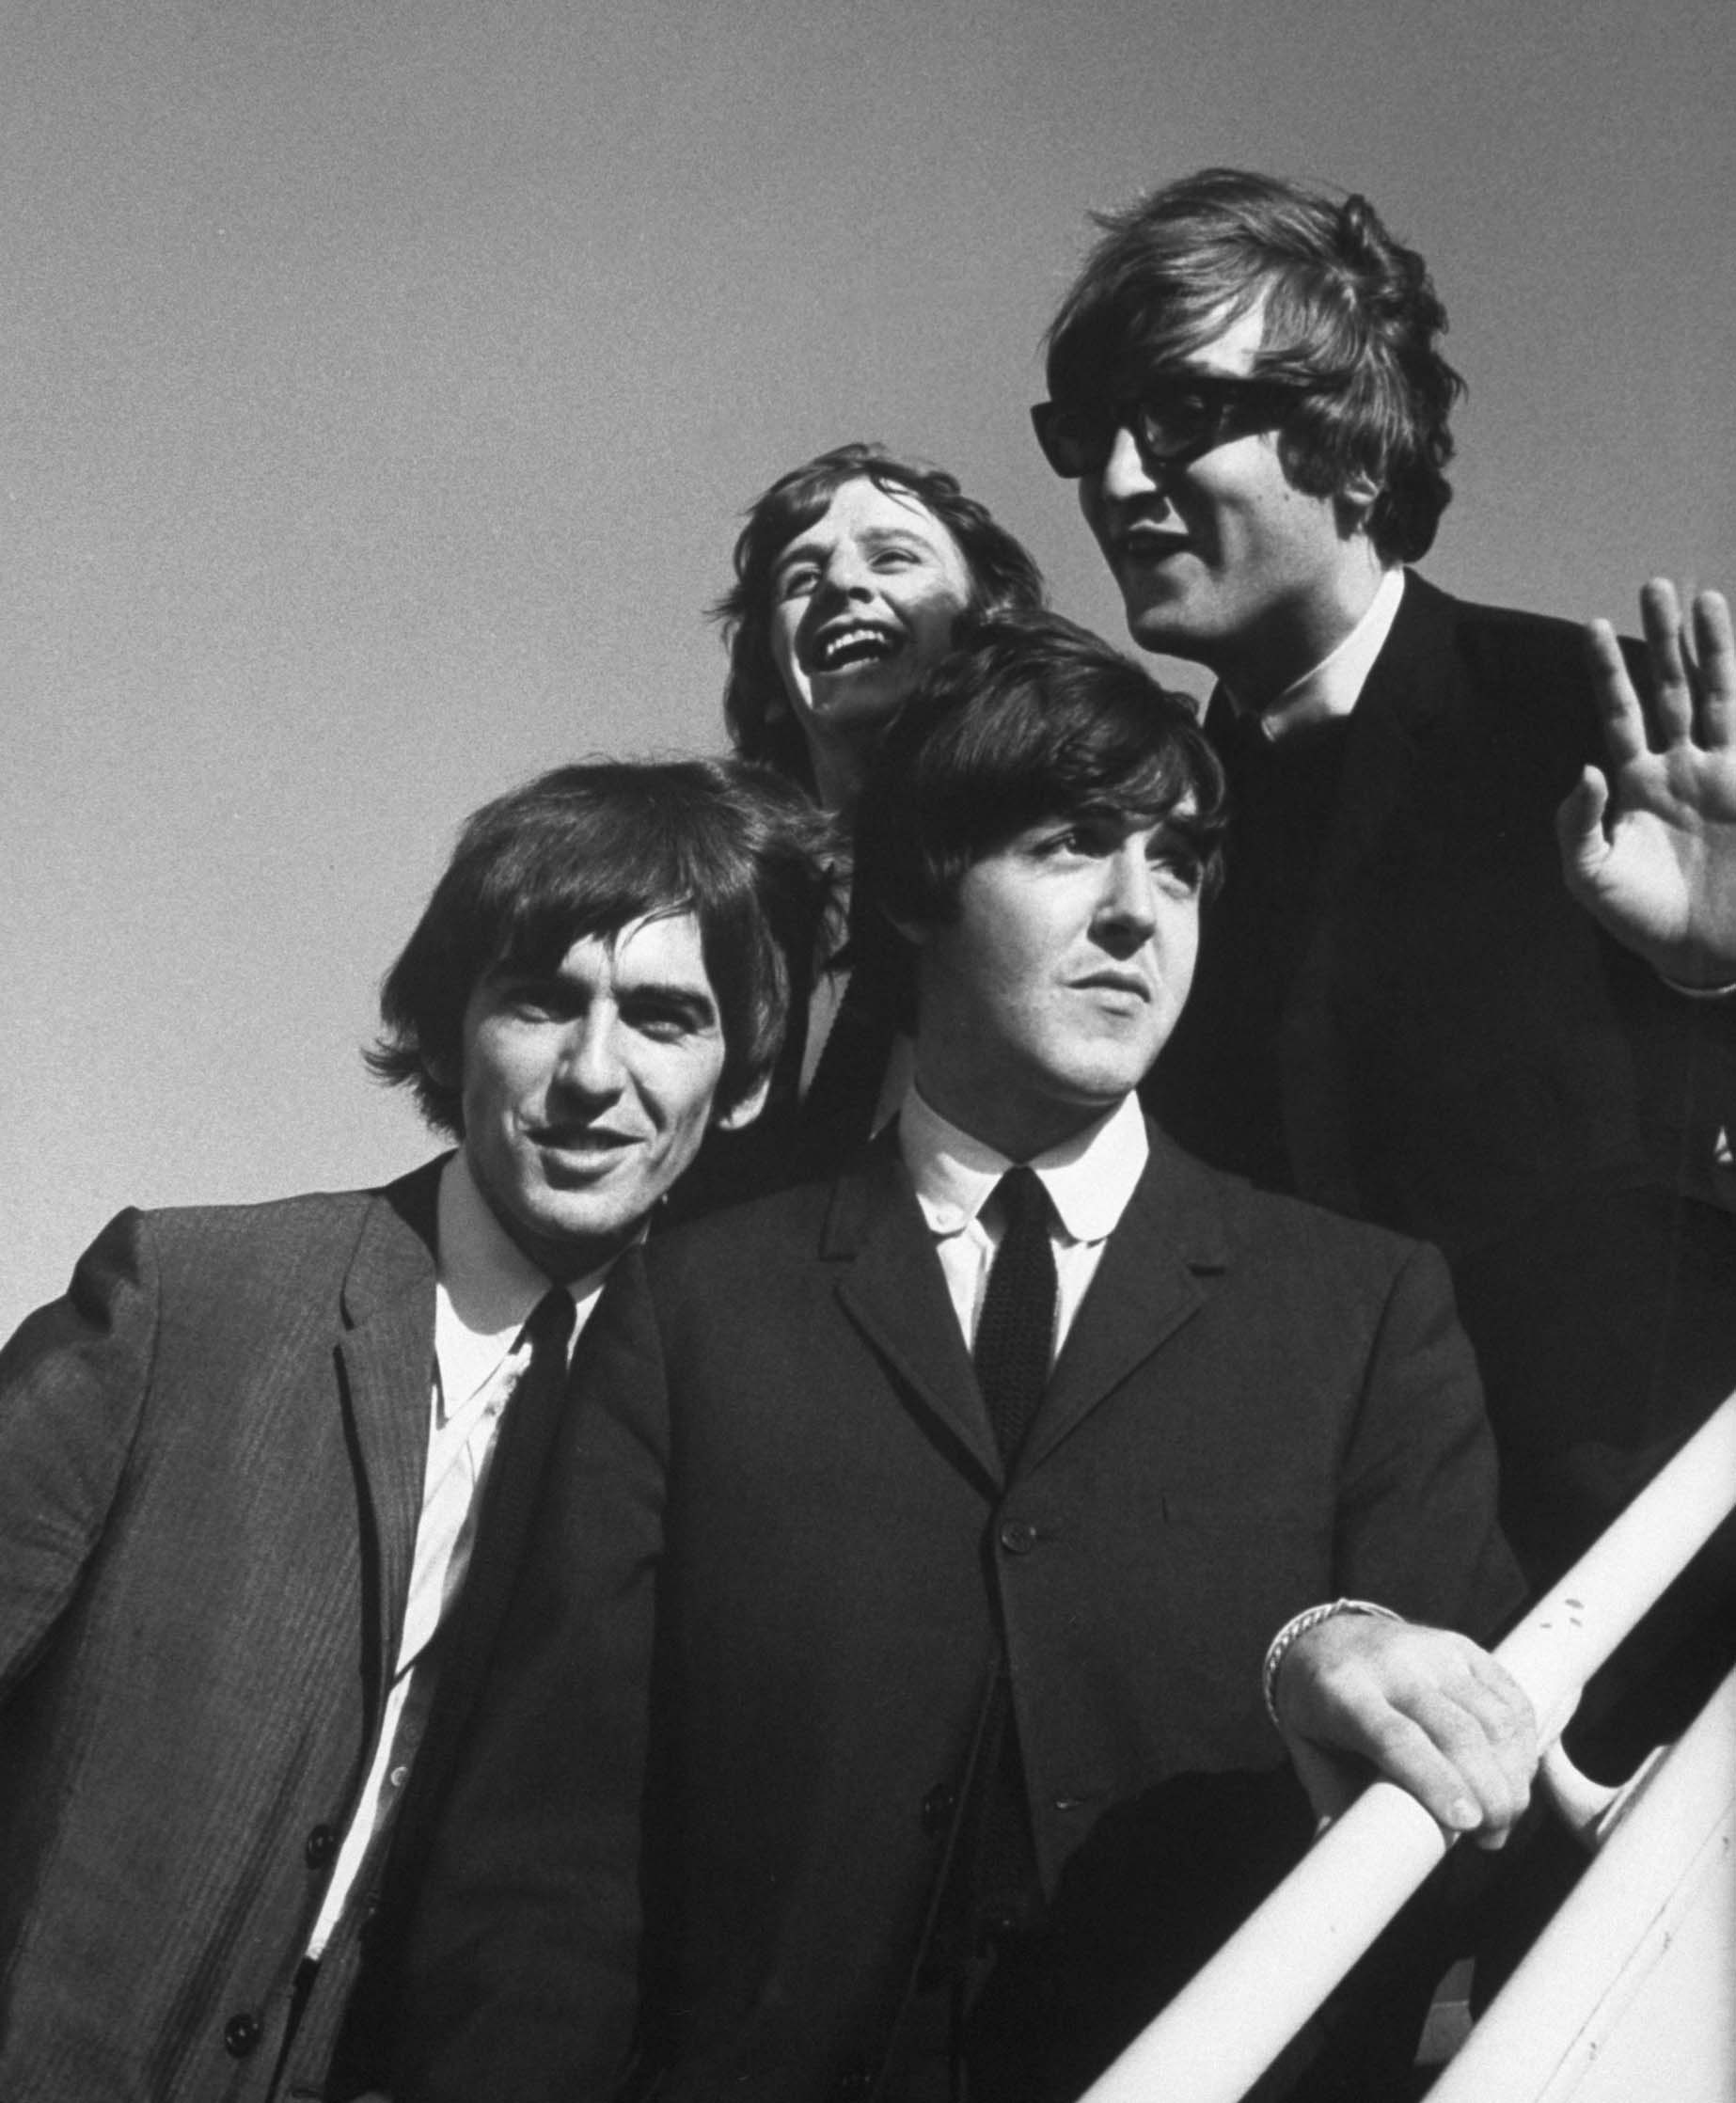 The Beatles wave to fans as they arrive at the Los Angeles airport in August 1964 for a press conference at the start of their second American tour.